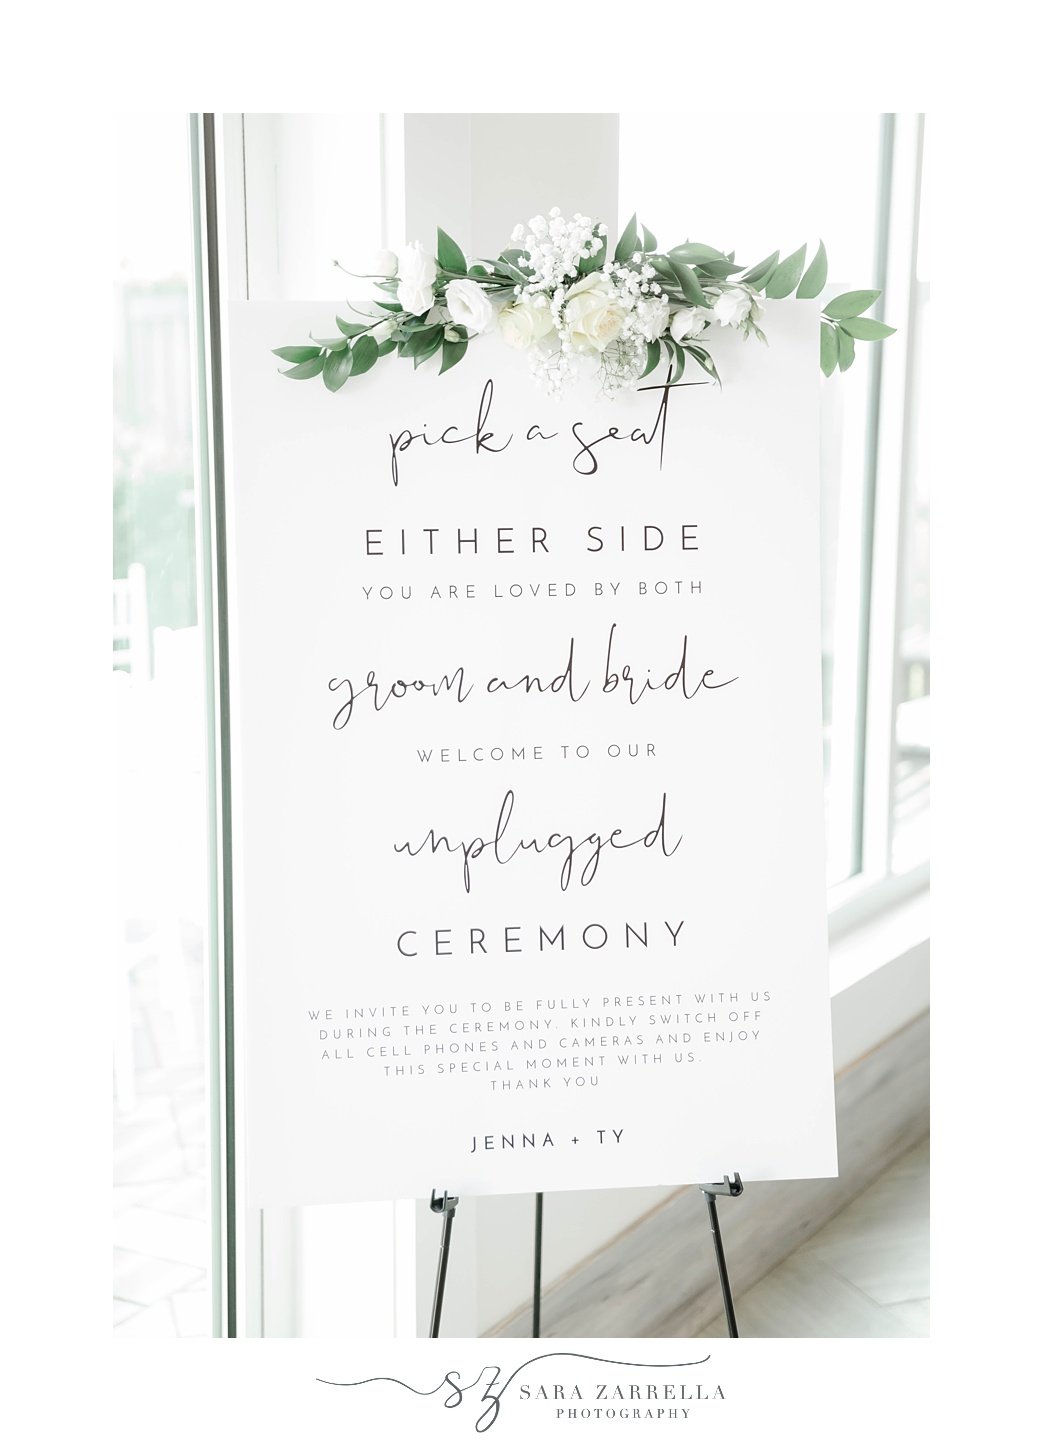 welcome sign for Newport Beach House wedding ceremony